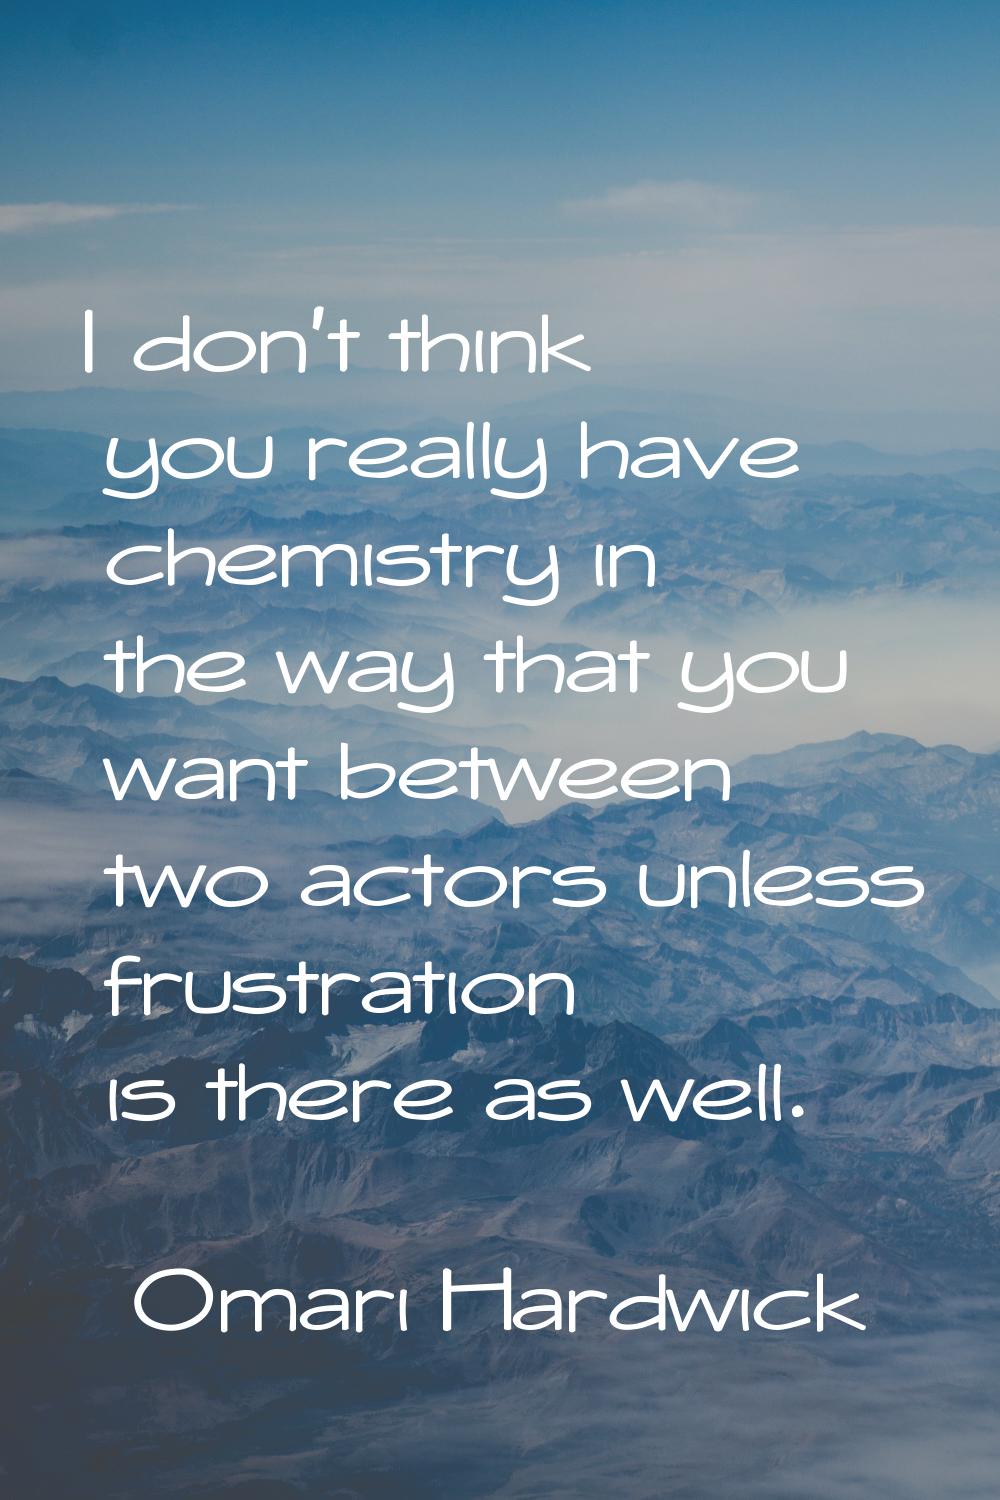 I don't think you really have chemistry in the way that you want between two actors unless frustrat